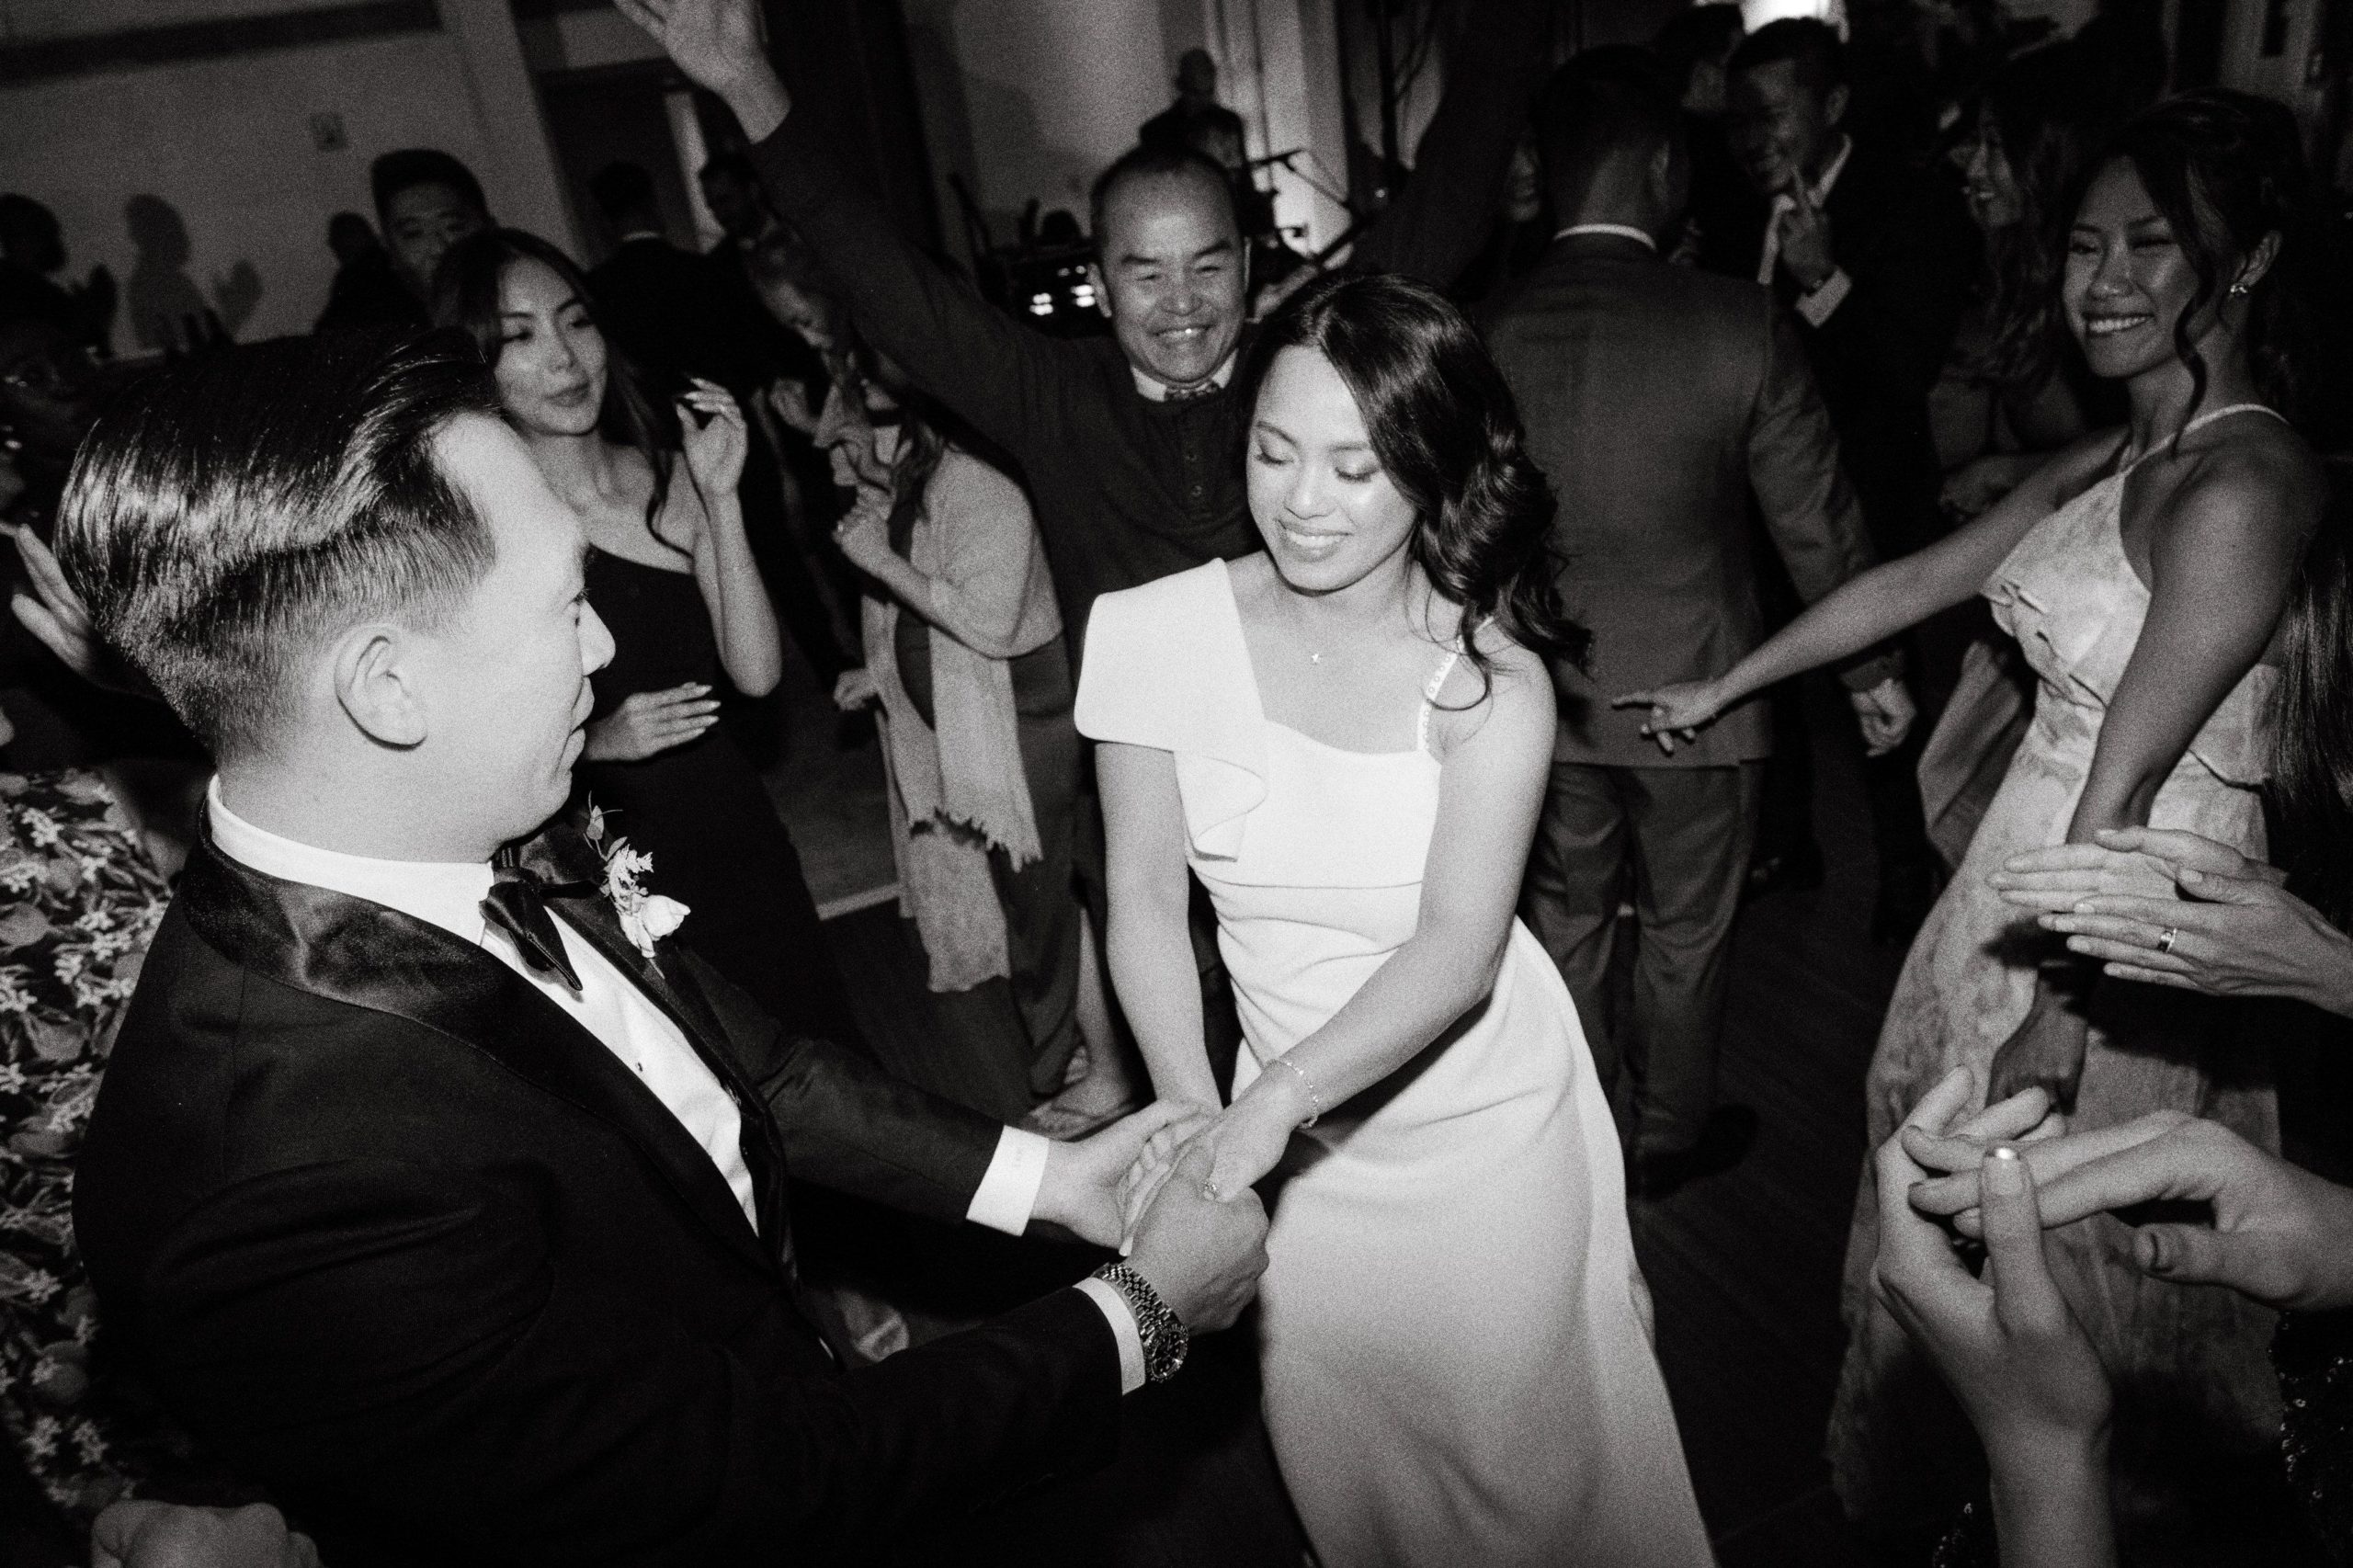 Black and white editorial image of the bride and groom dancing with guests. Hiring a wedding planner image by Jenny Fu Studio